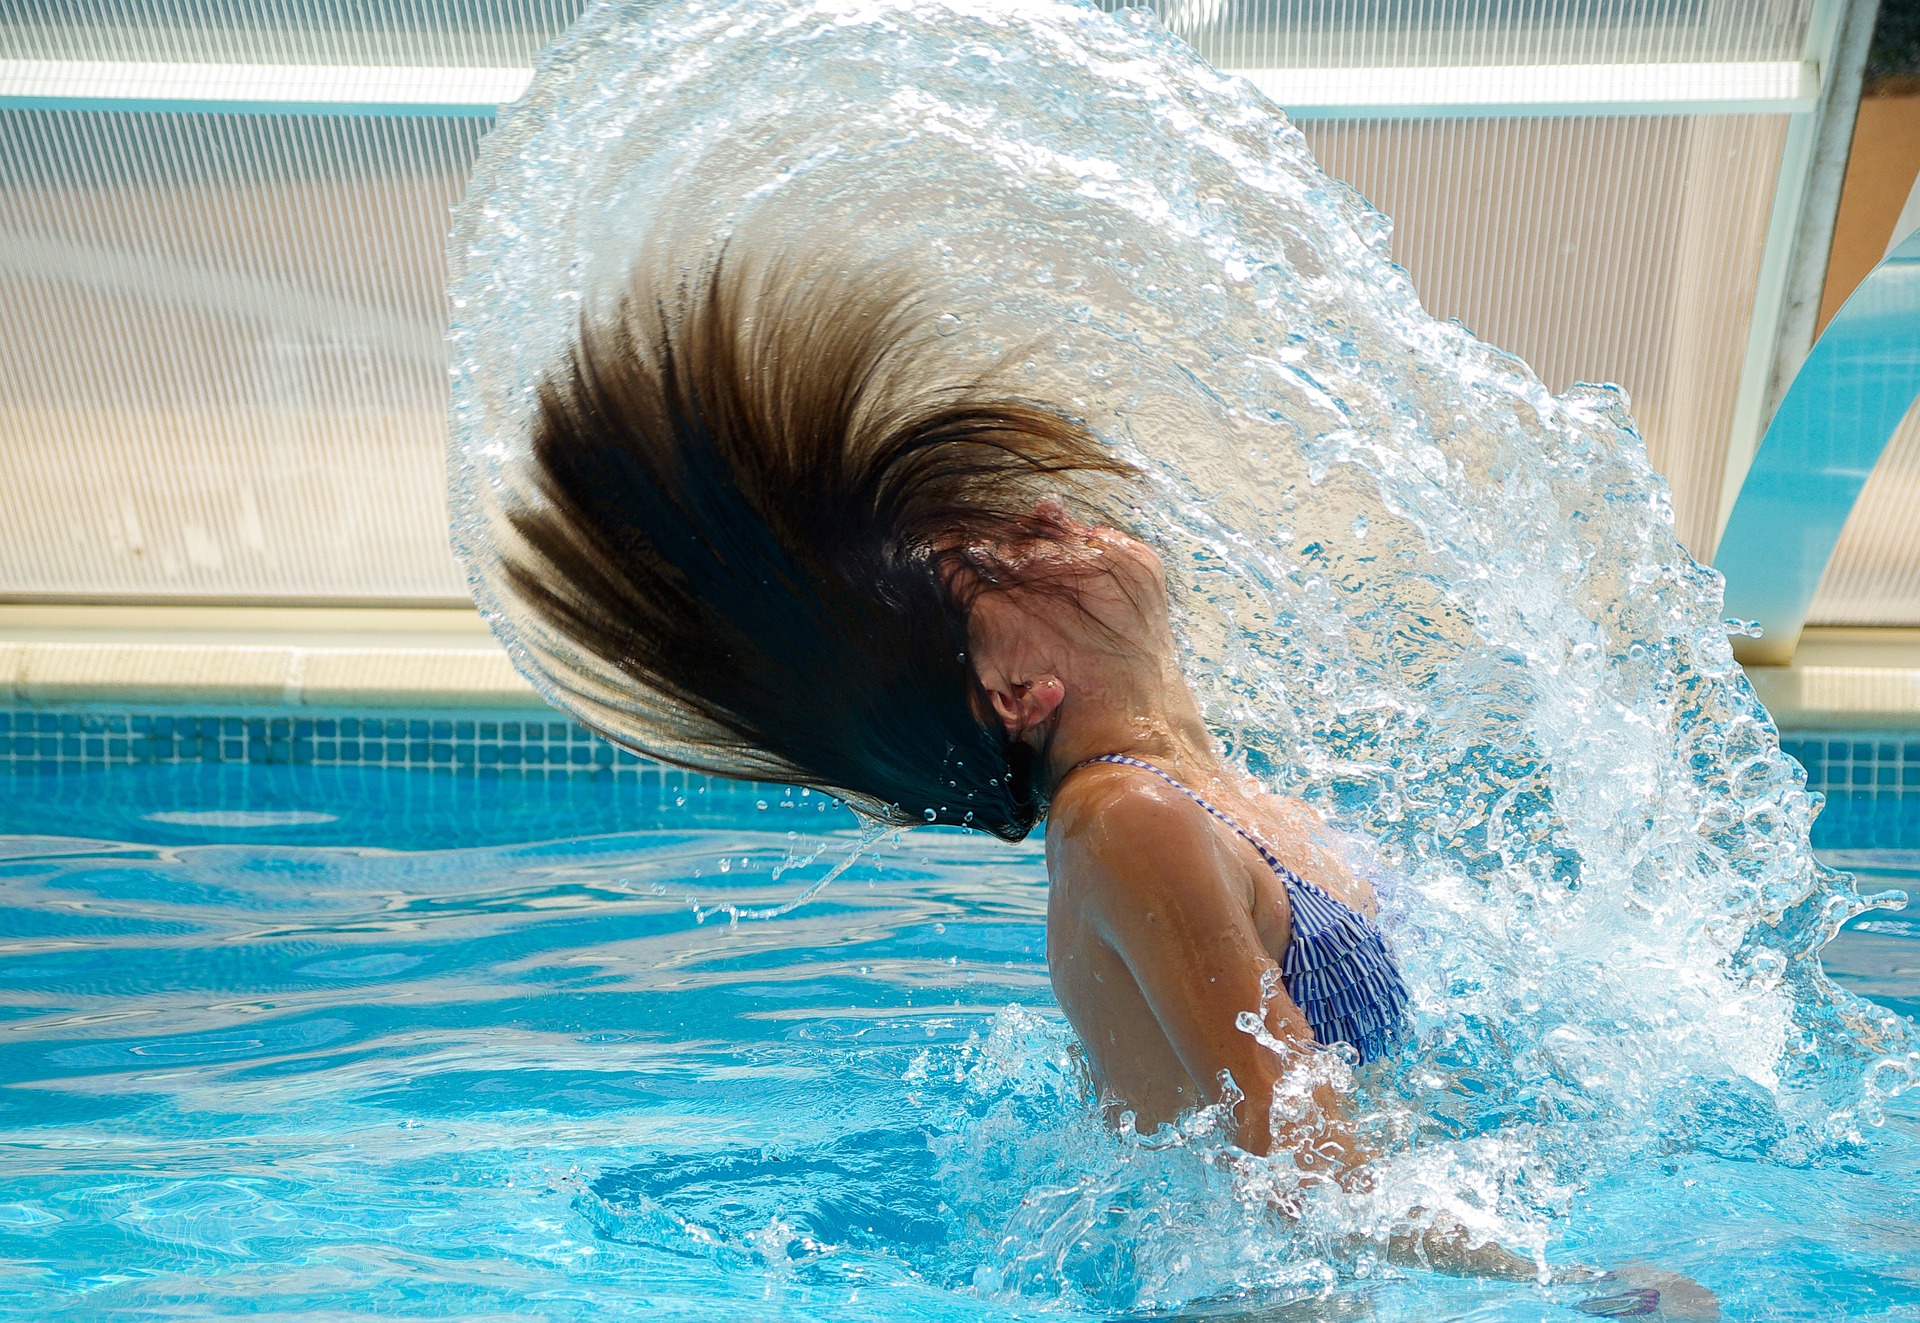 Lady throwing hair back in swimming pool